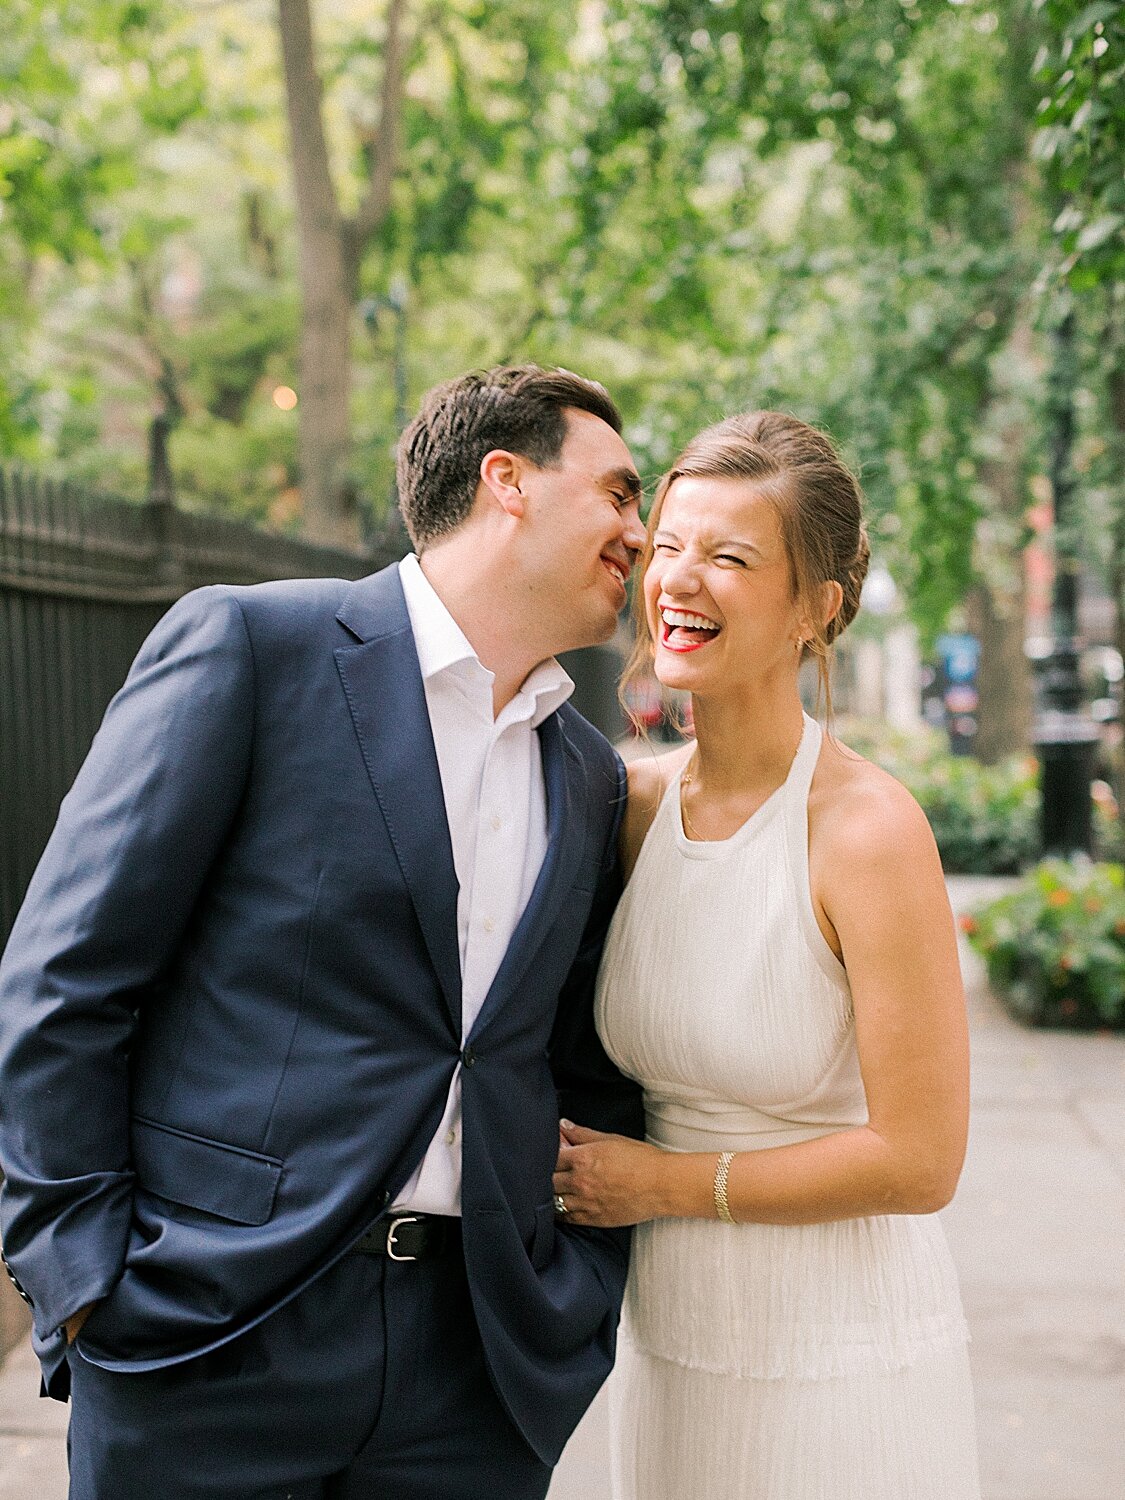 groom makes bride laugh during engagement photos | Asher Gardner Photography | Gramercy Park Engagement Session